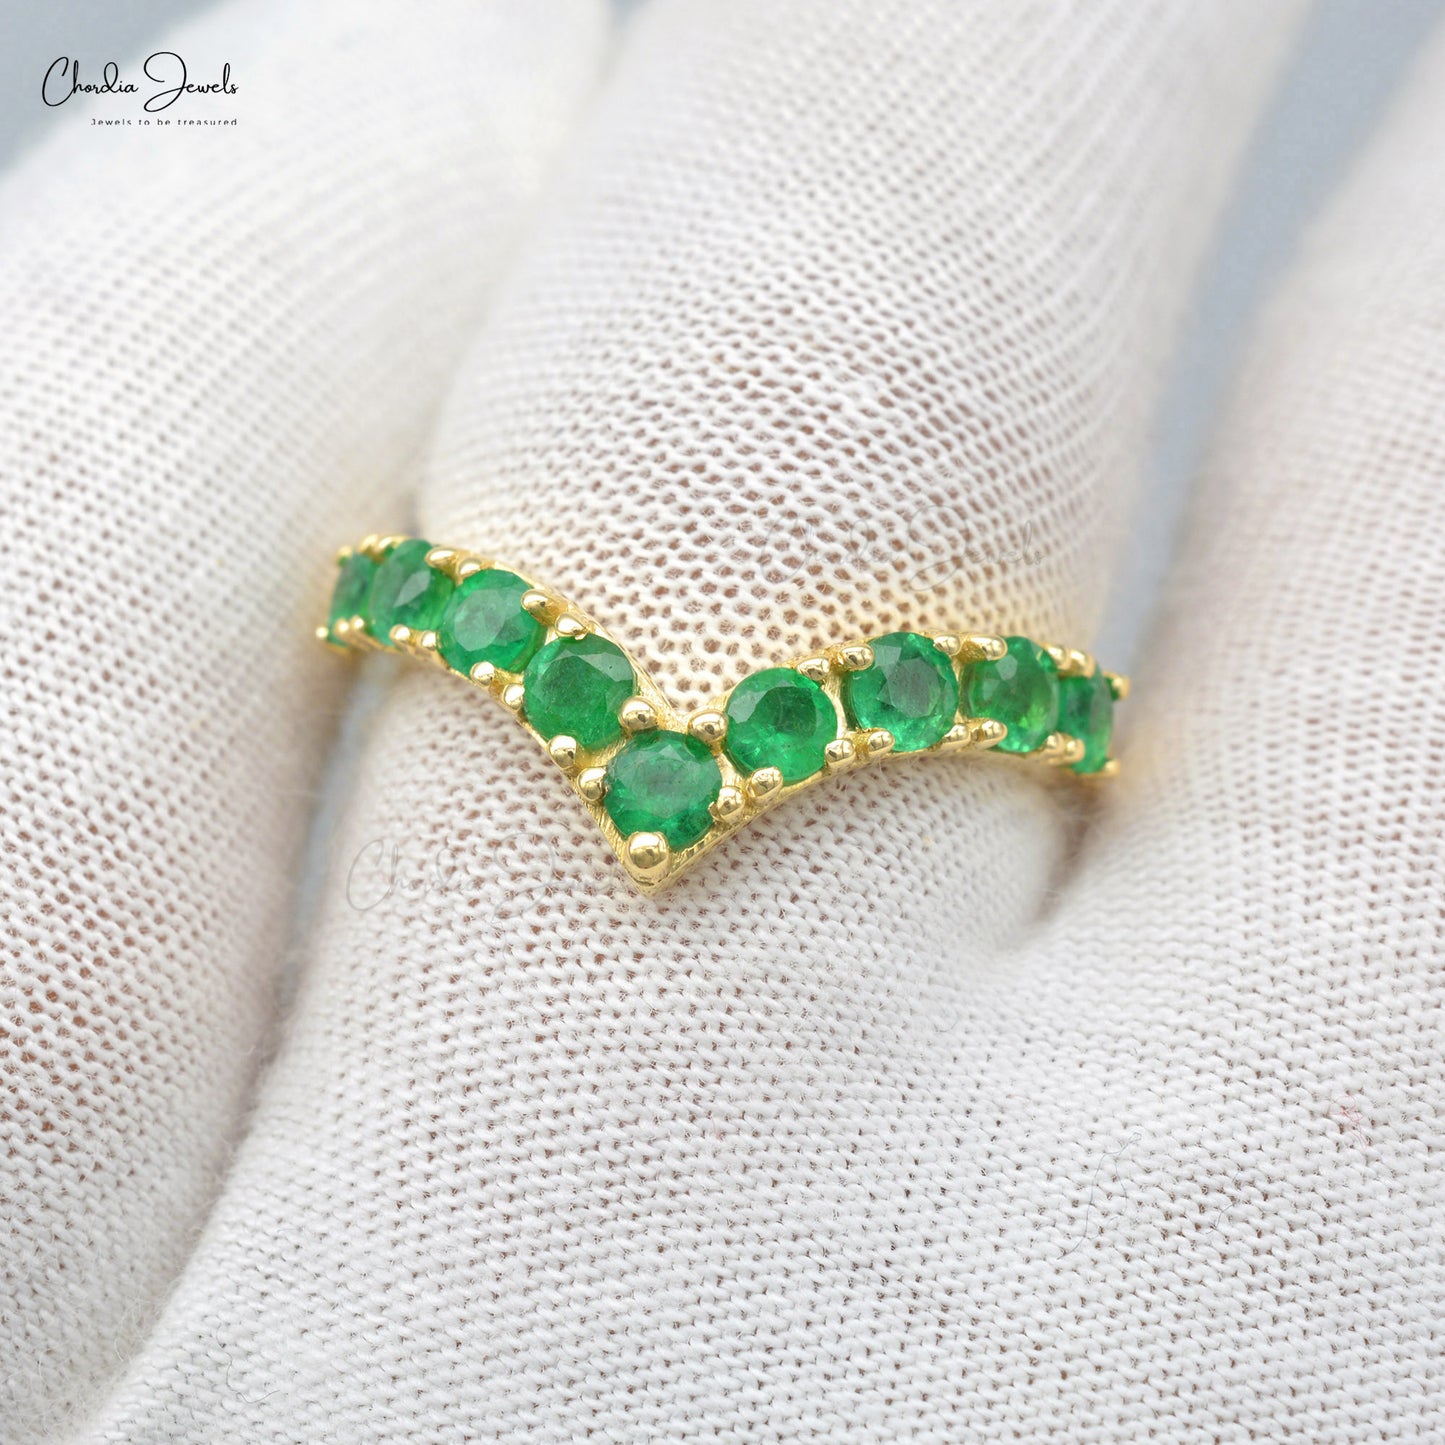 Enhance your personal style with this stackable ring.